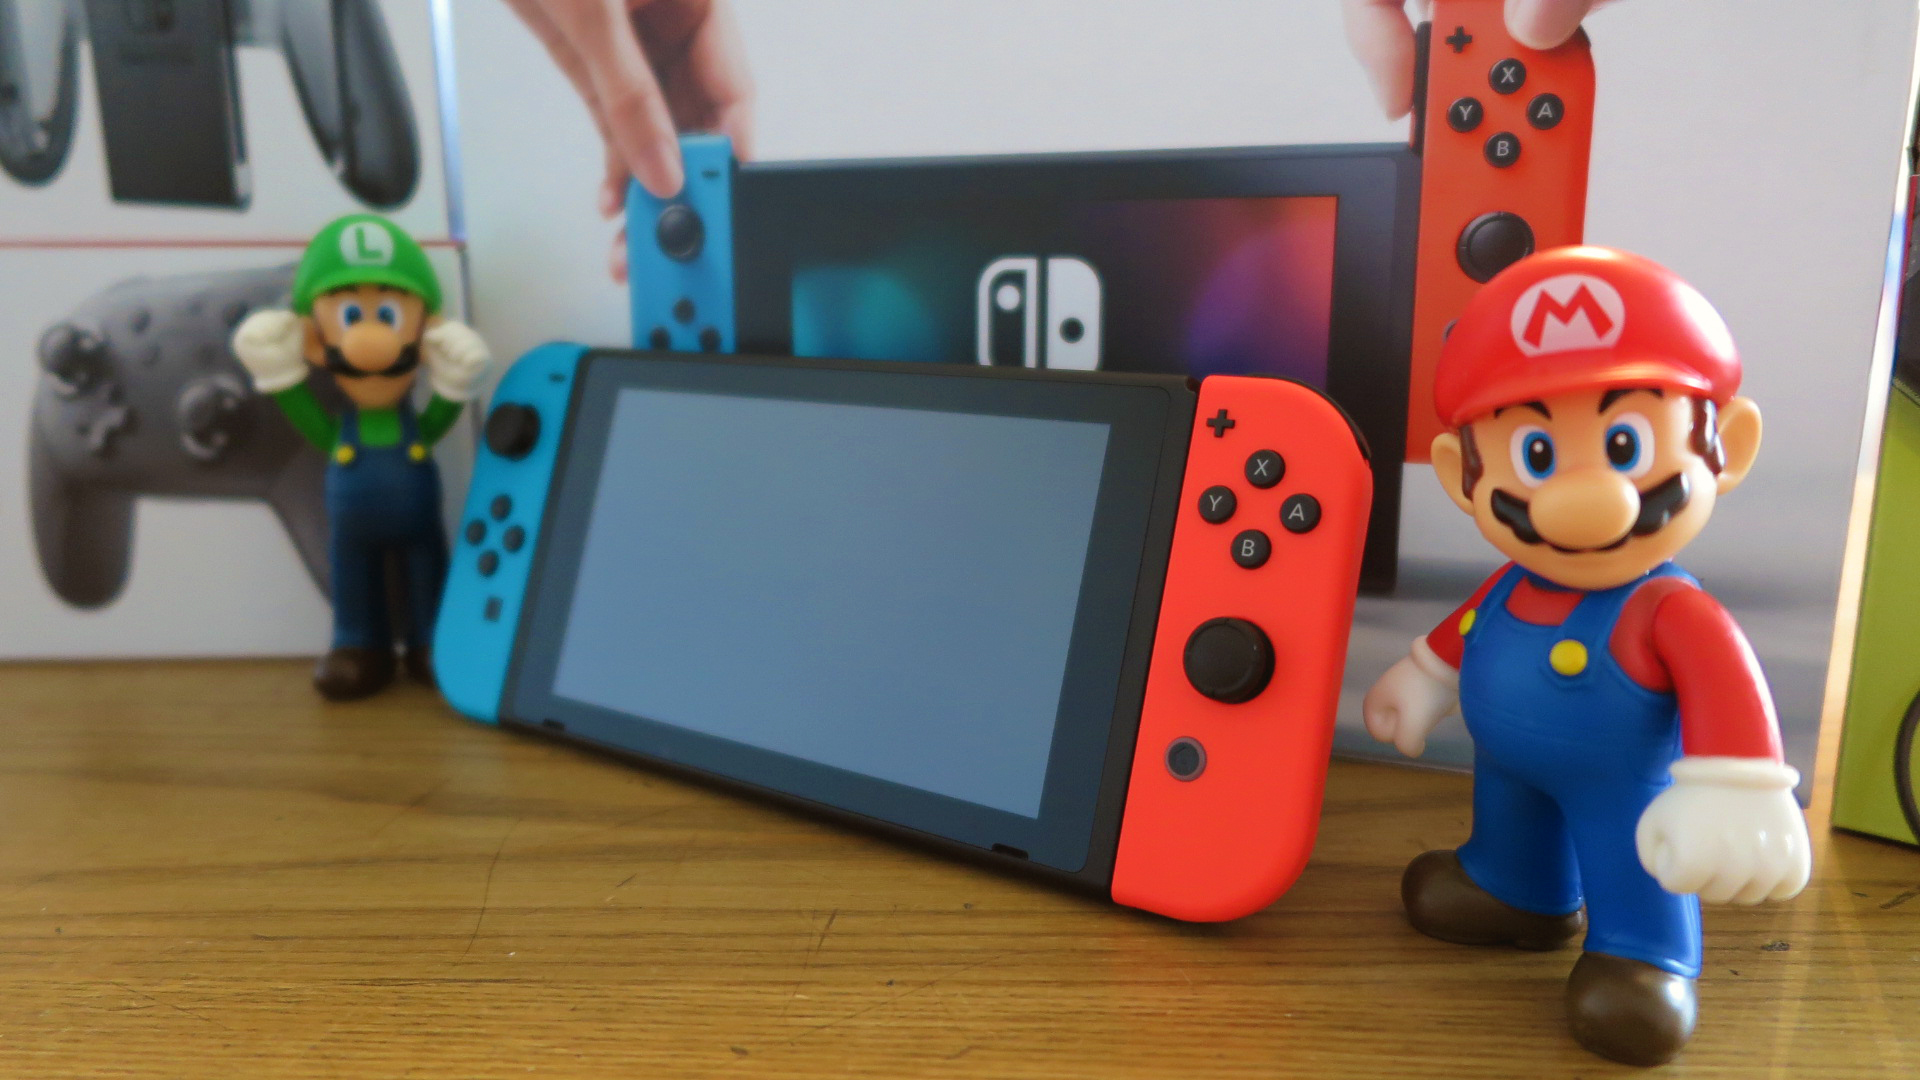 how much will the nintendo switch cost on boxing day